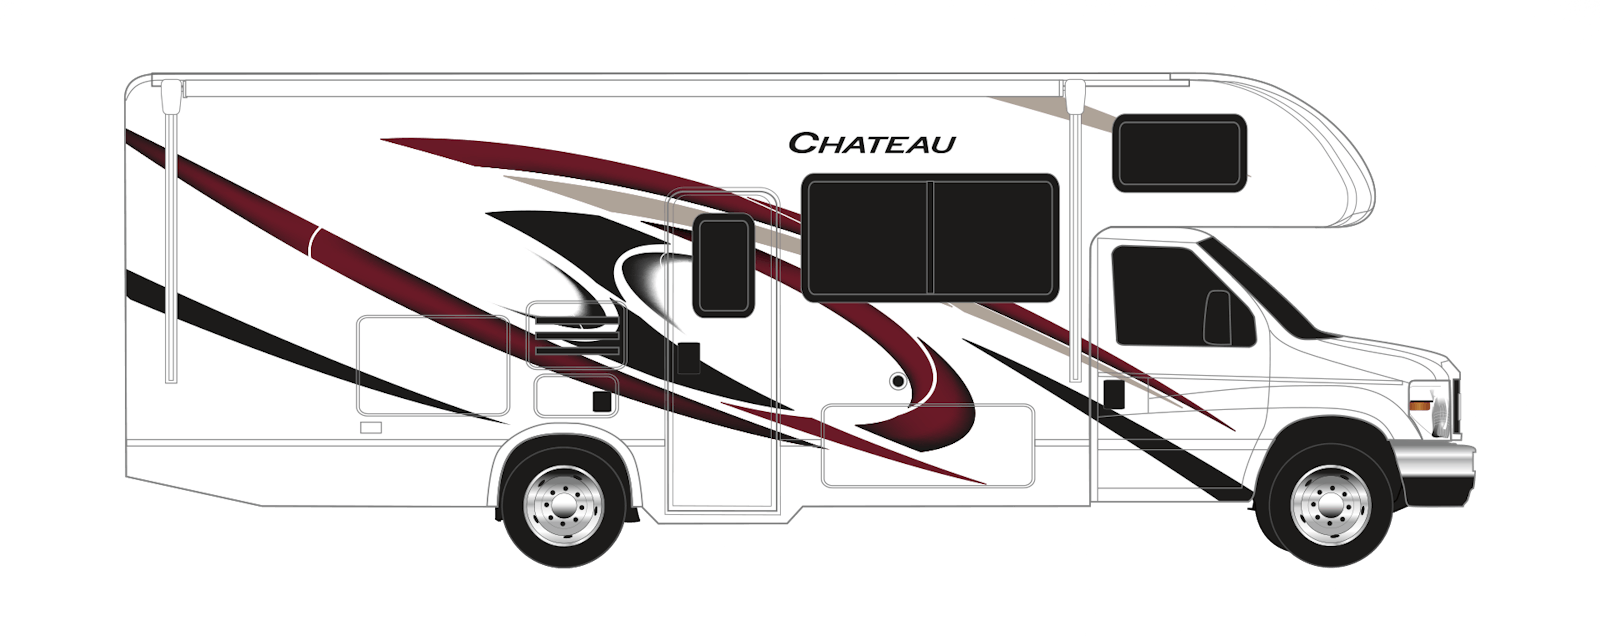 2022 Thor Chateau Class C RV Rodeo Red Standard Graphics All Floor Plans Exterior Artwork